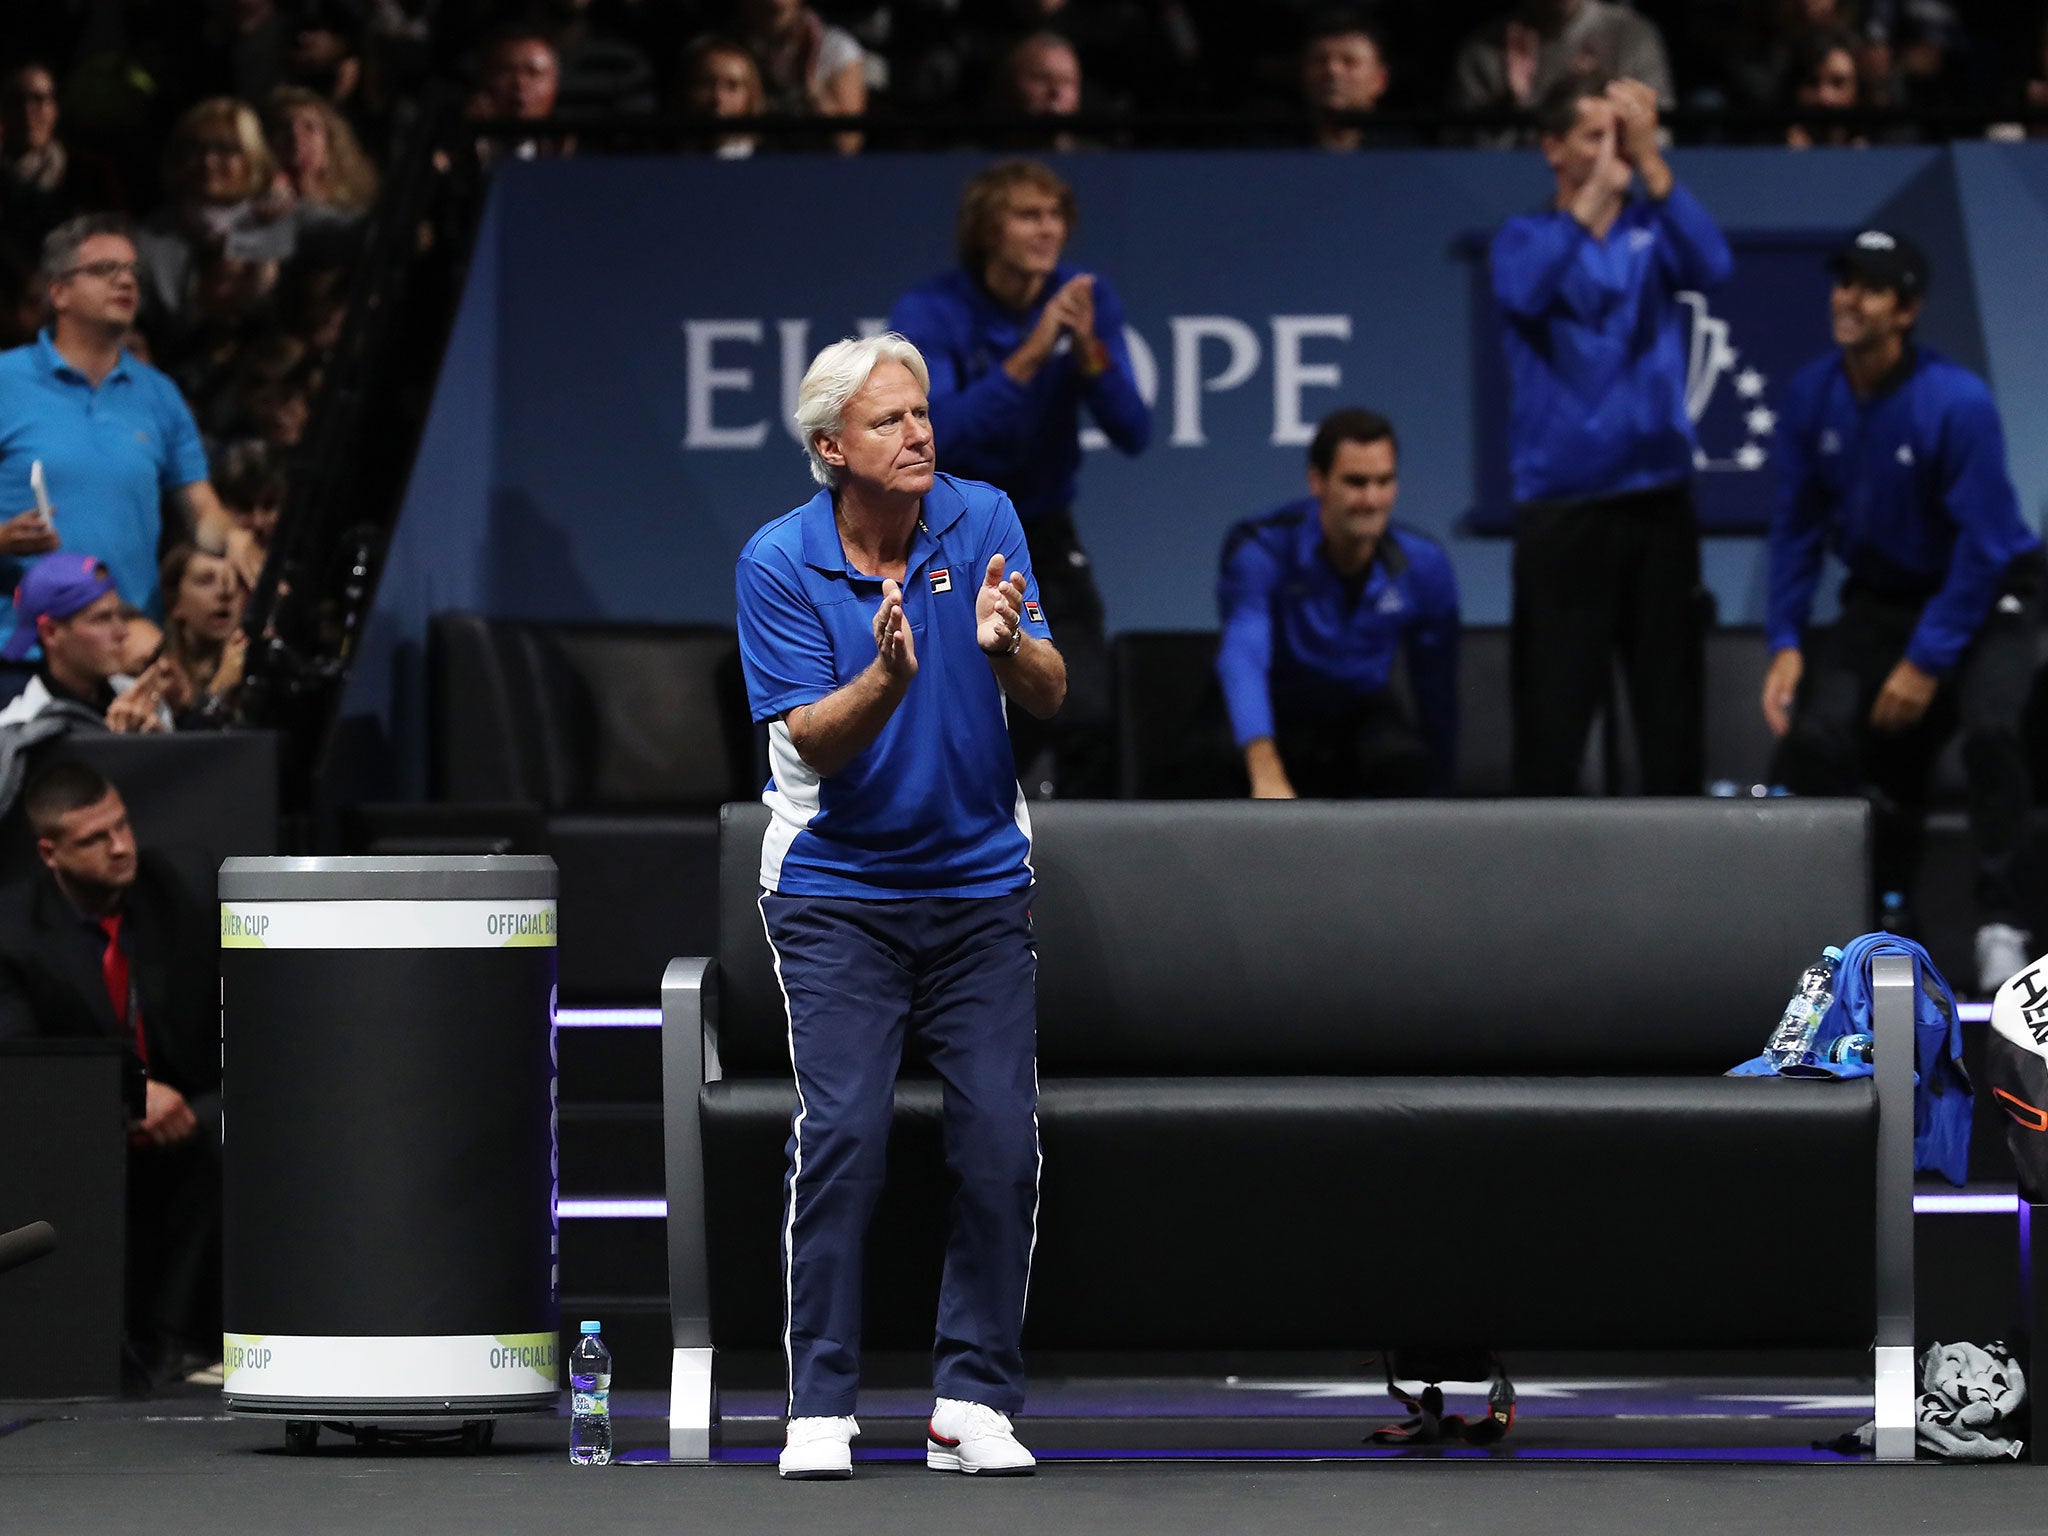 Captain Bjorn Borg watches on from the sideline